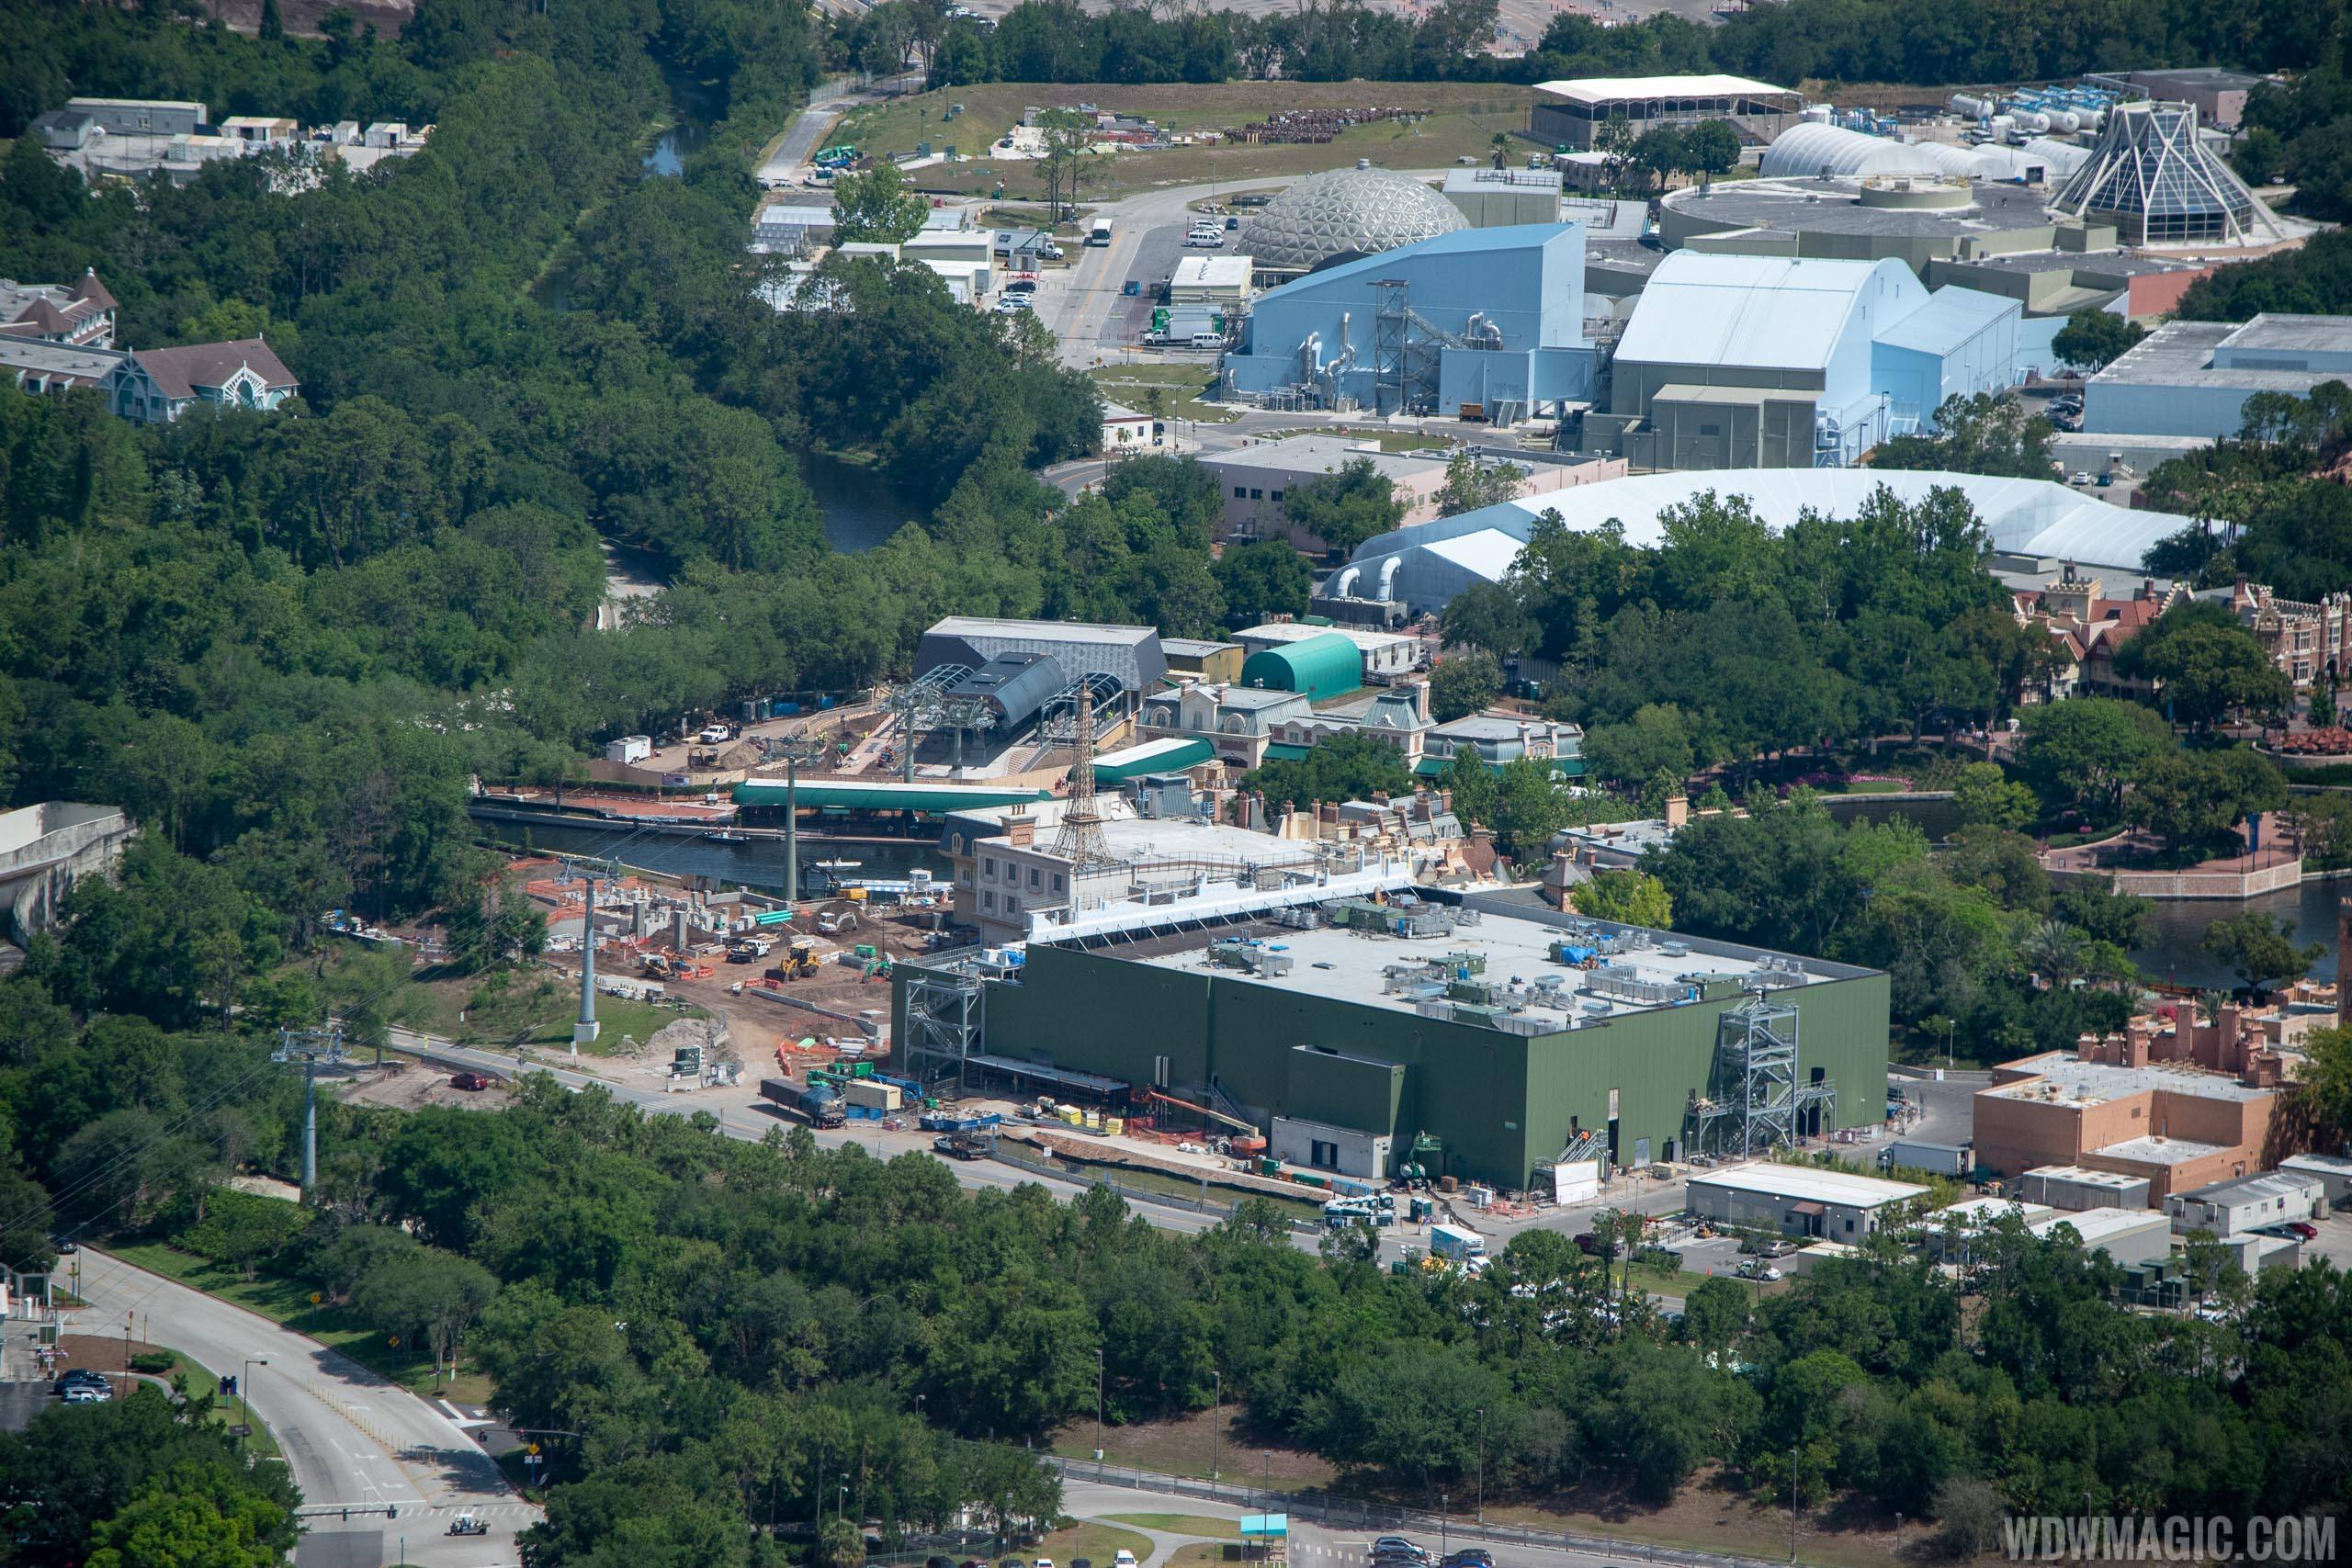 Remy's Ratatouille Adventure construction - May 2019